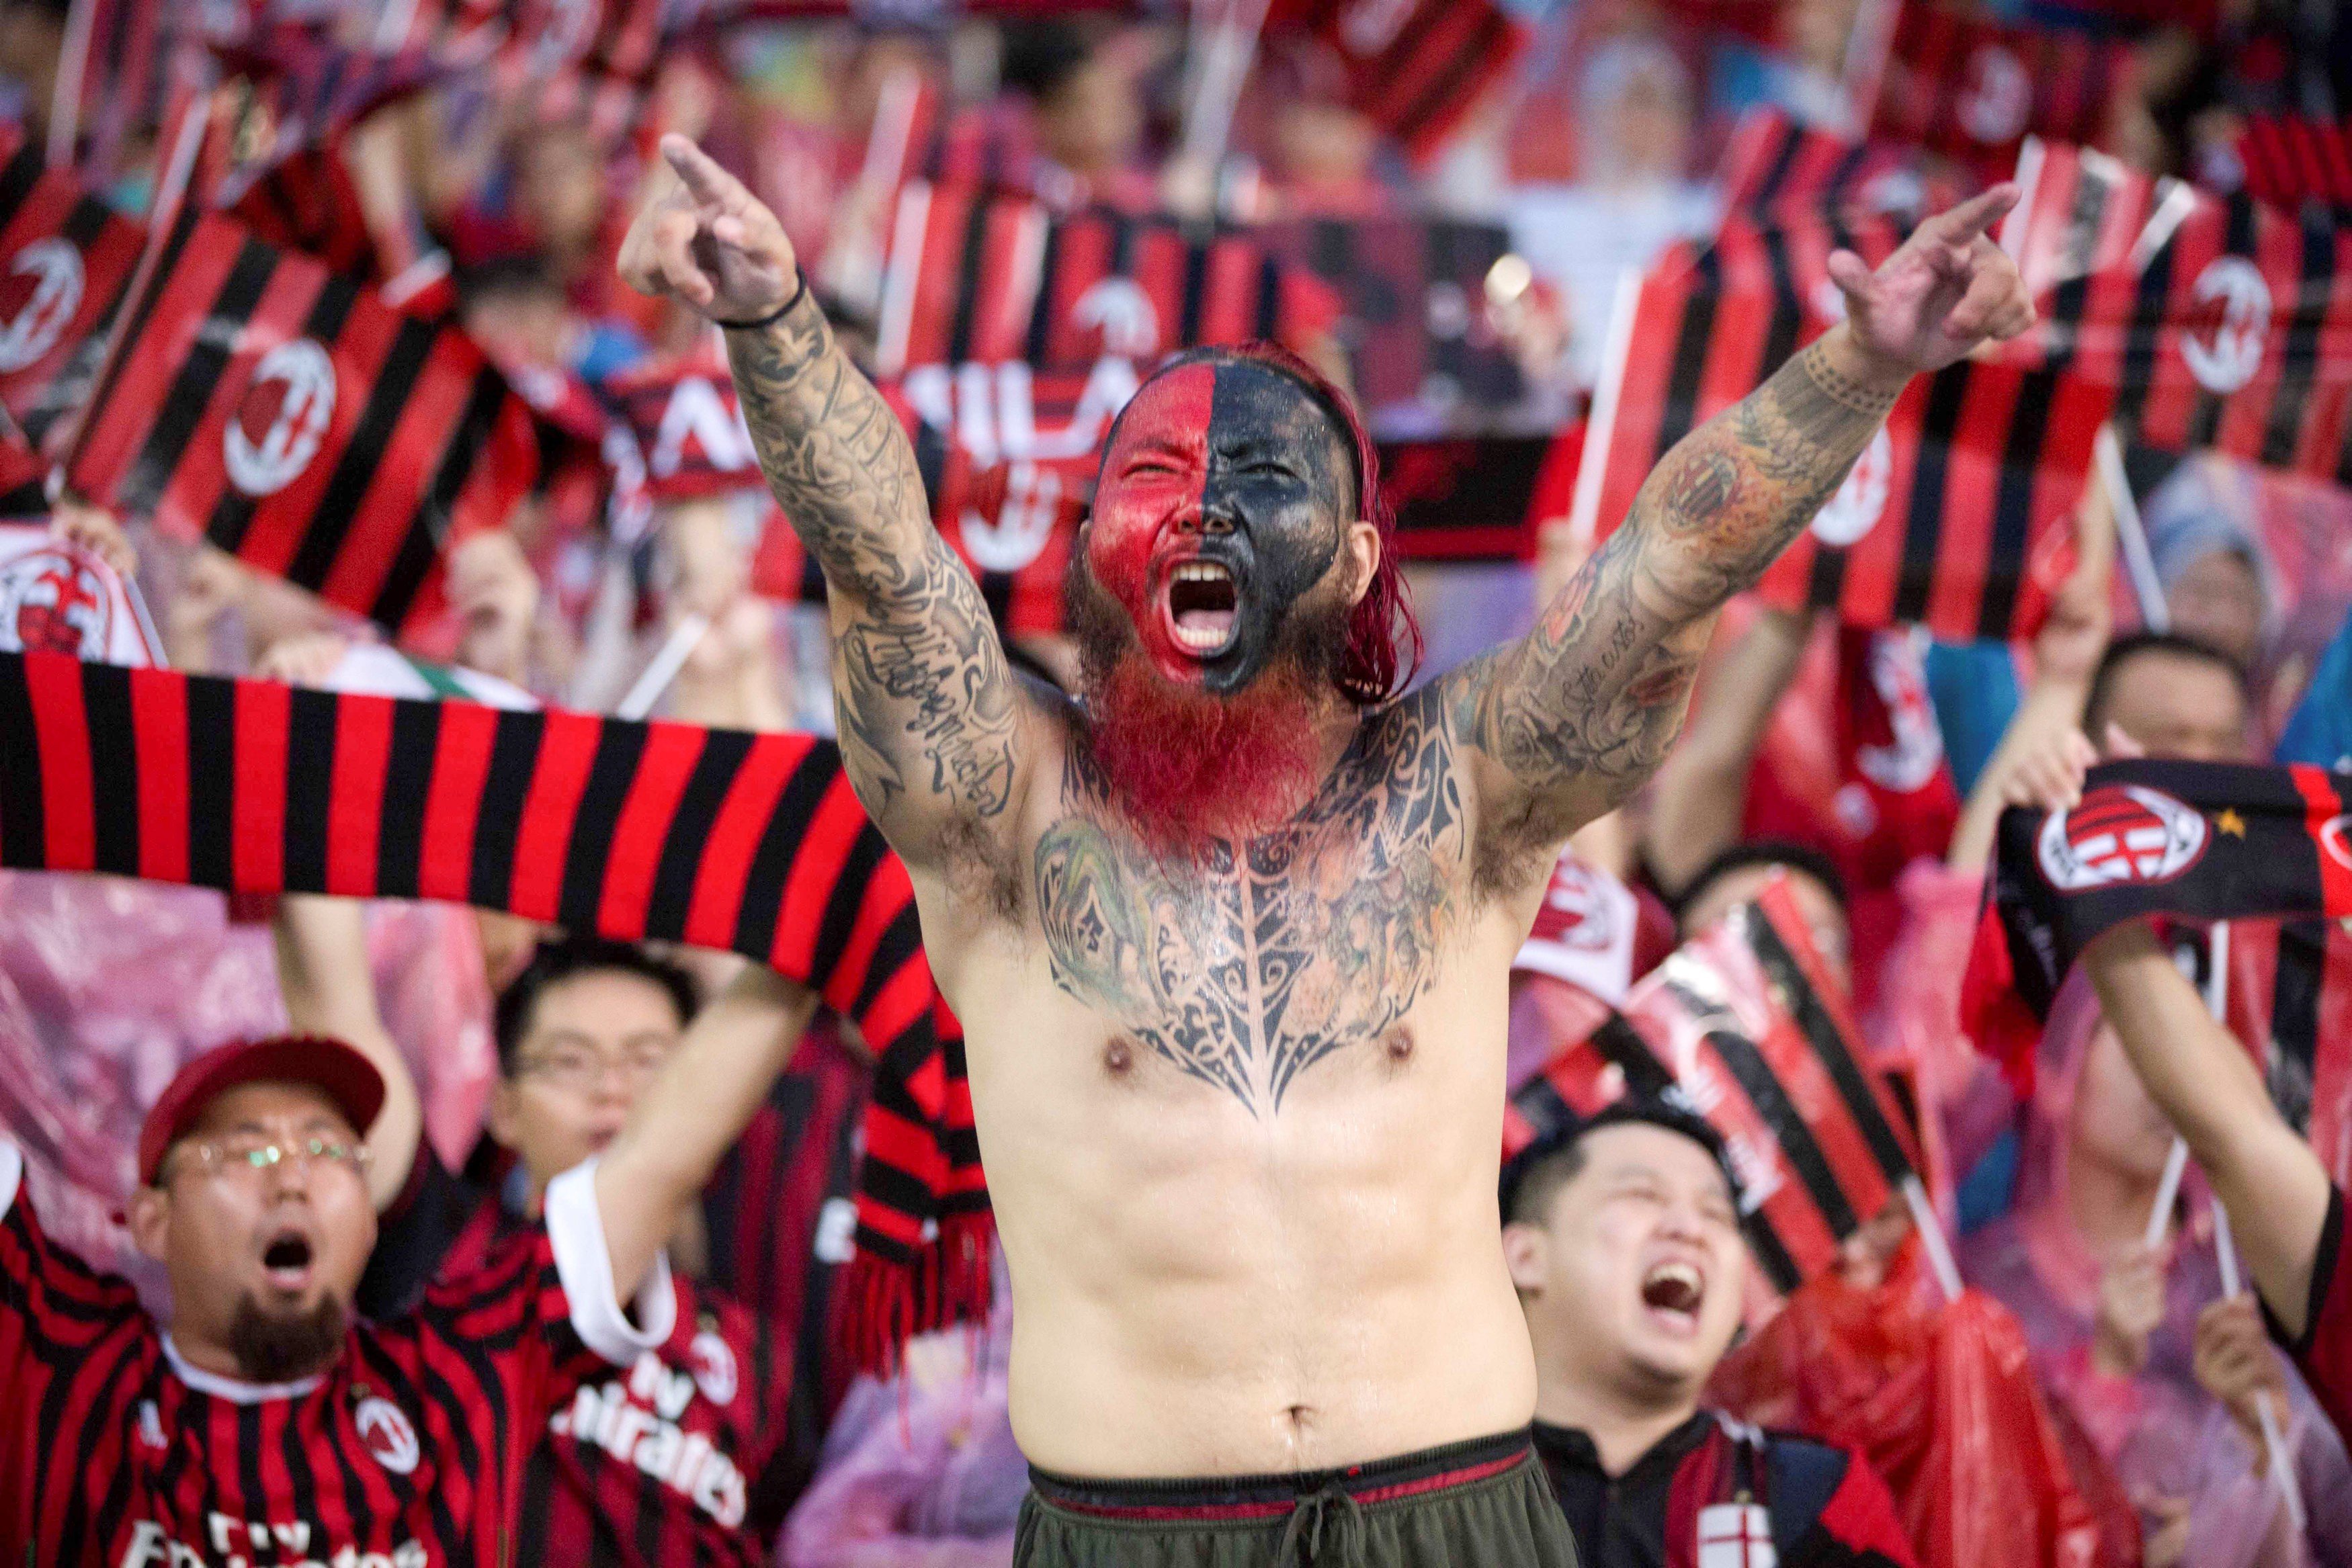 A Chinese AC Milan fan in the crowd during the pre-season friendly match against Borussia Dortmund in Guangzhou. Both Milan clubs are currently under Chinese ownership. Photo: Reuters